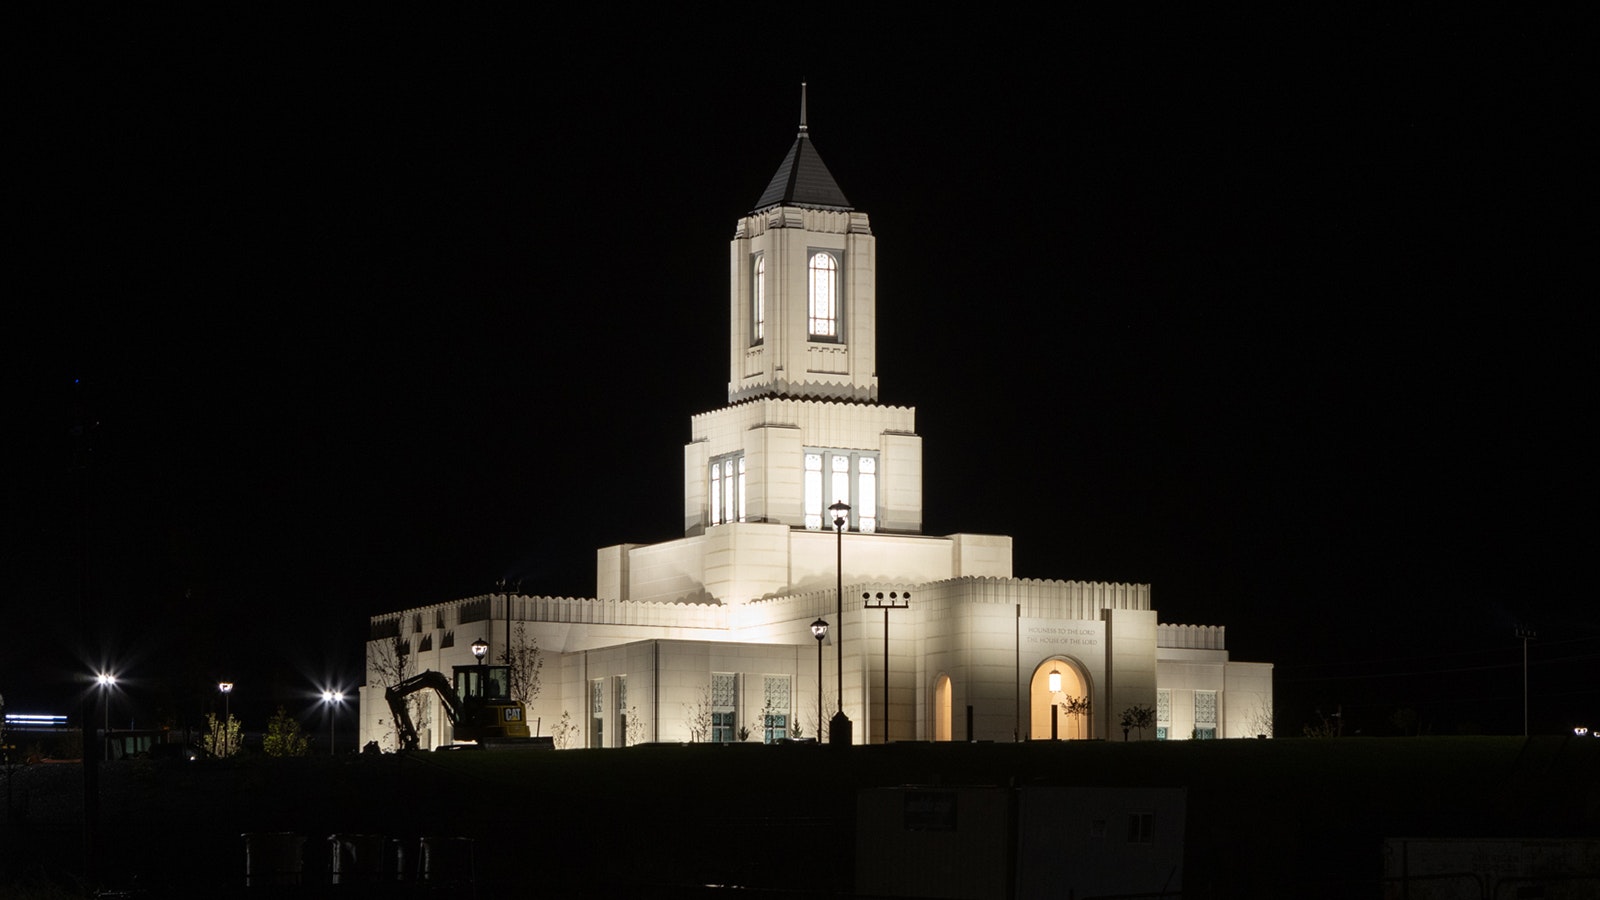 A new Church of Jesus Christ of Latter-day Saints temple in Casper, Wyoming, is close to being completed. It's seen here illuminated at night.